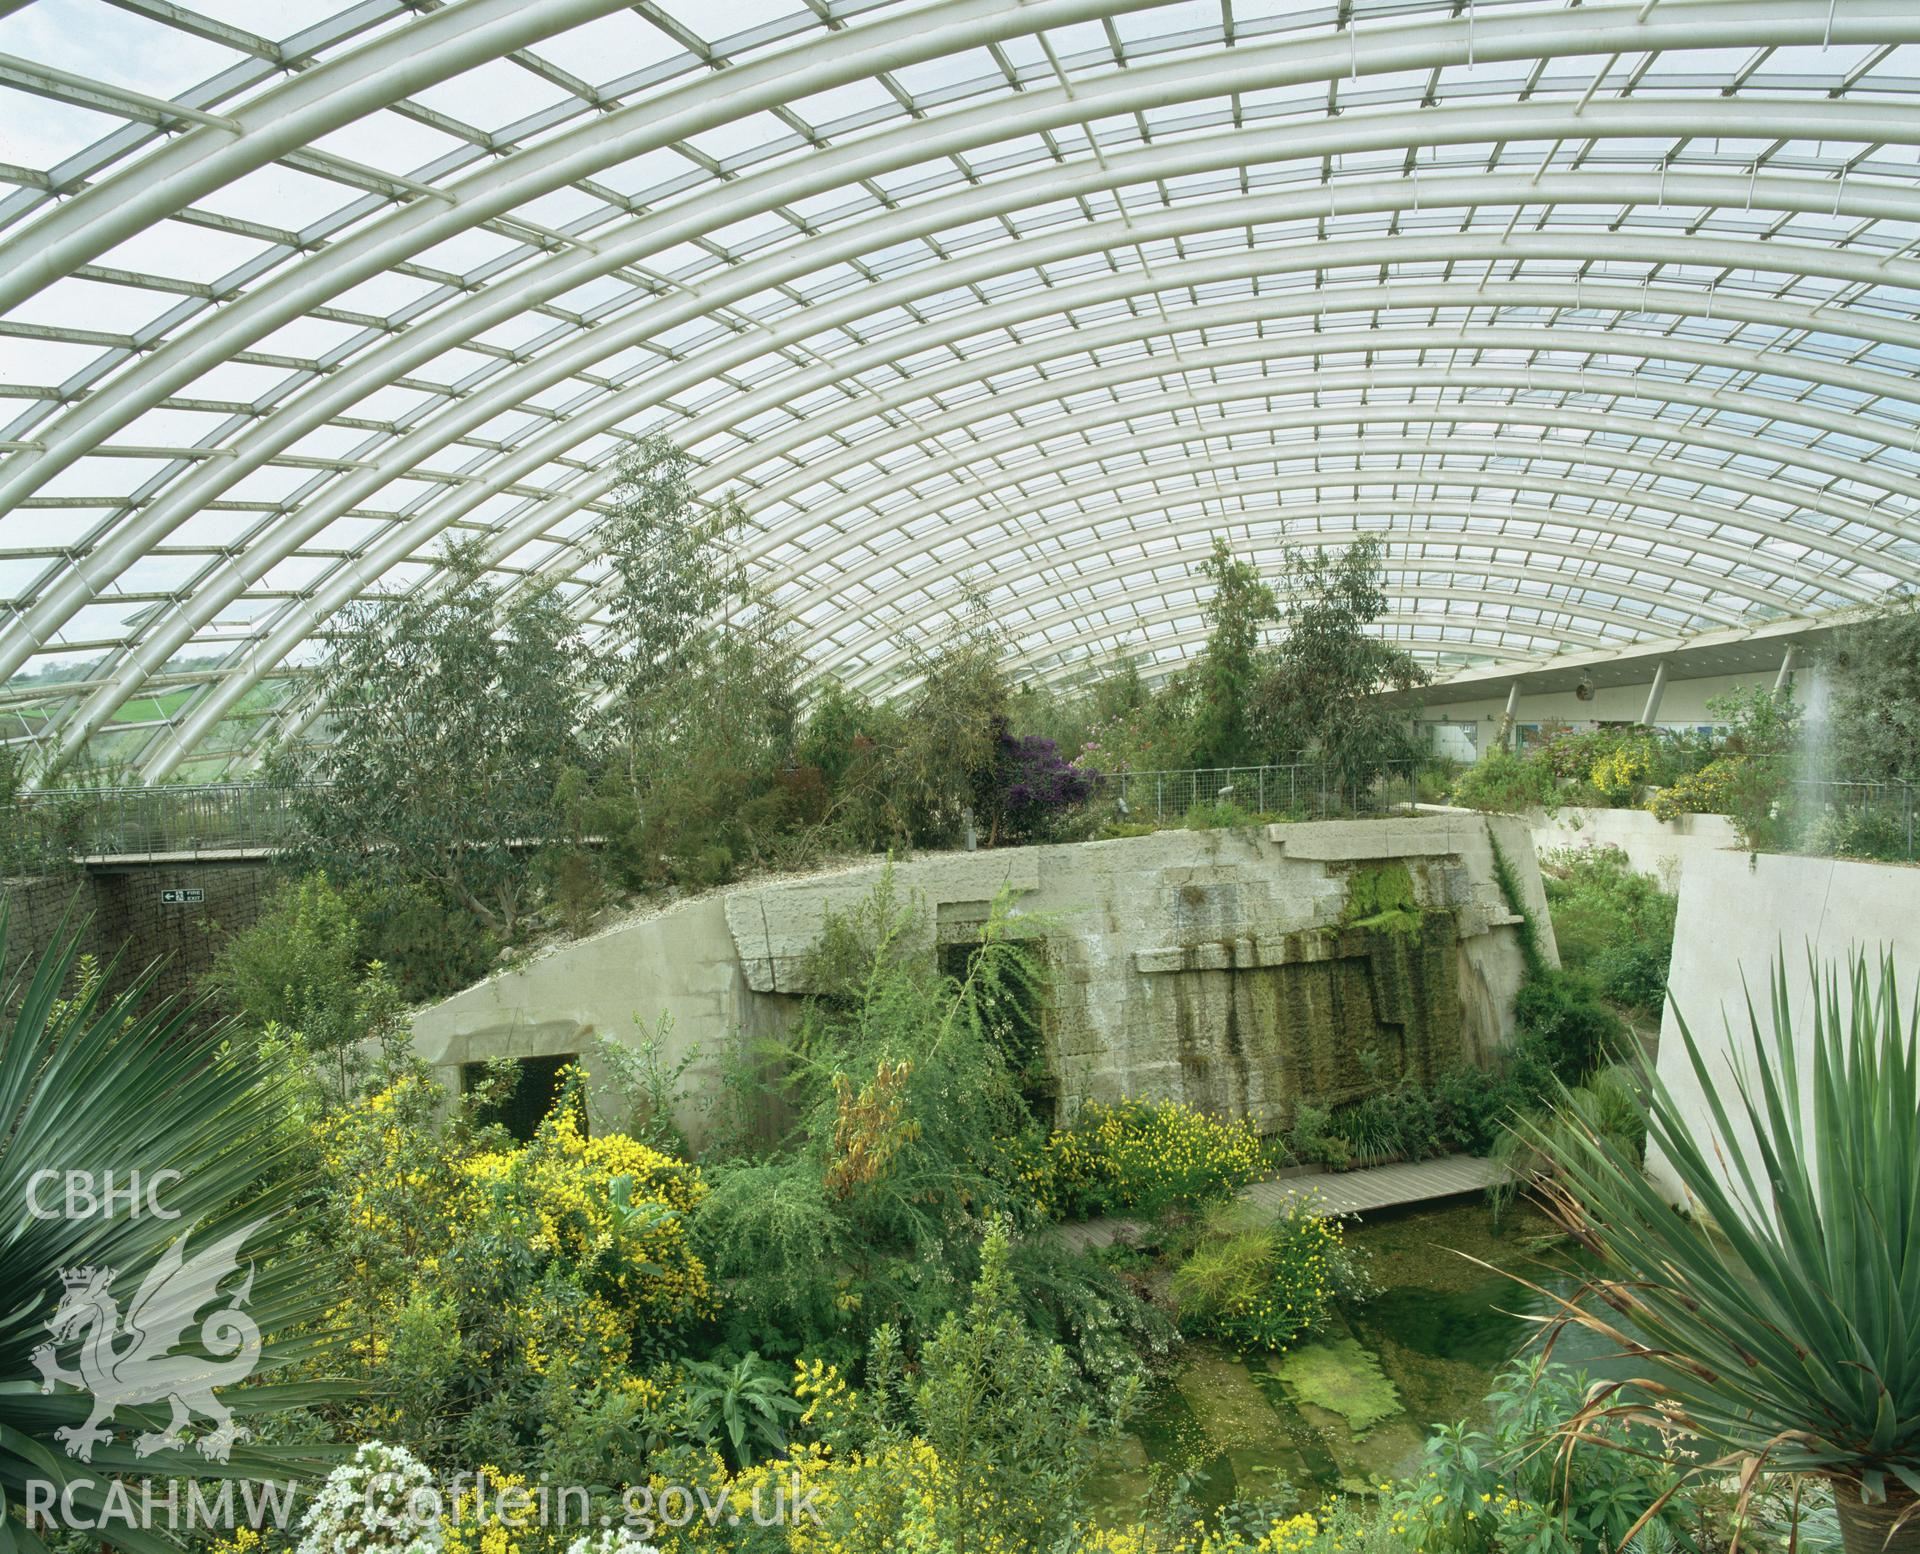 Colour transparency showing interior view of the glass house at the National Botanic Gardens, Llanarthne, produced by Iain Wright, June 2004